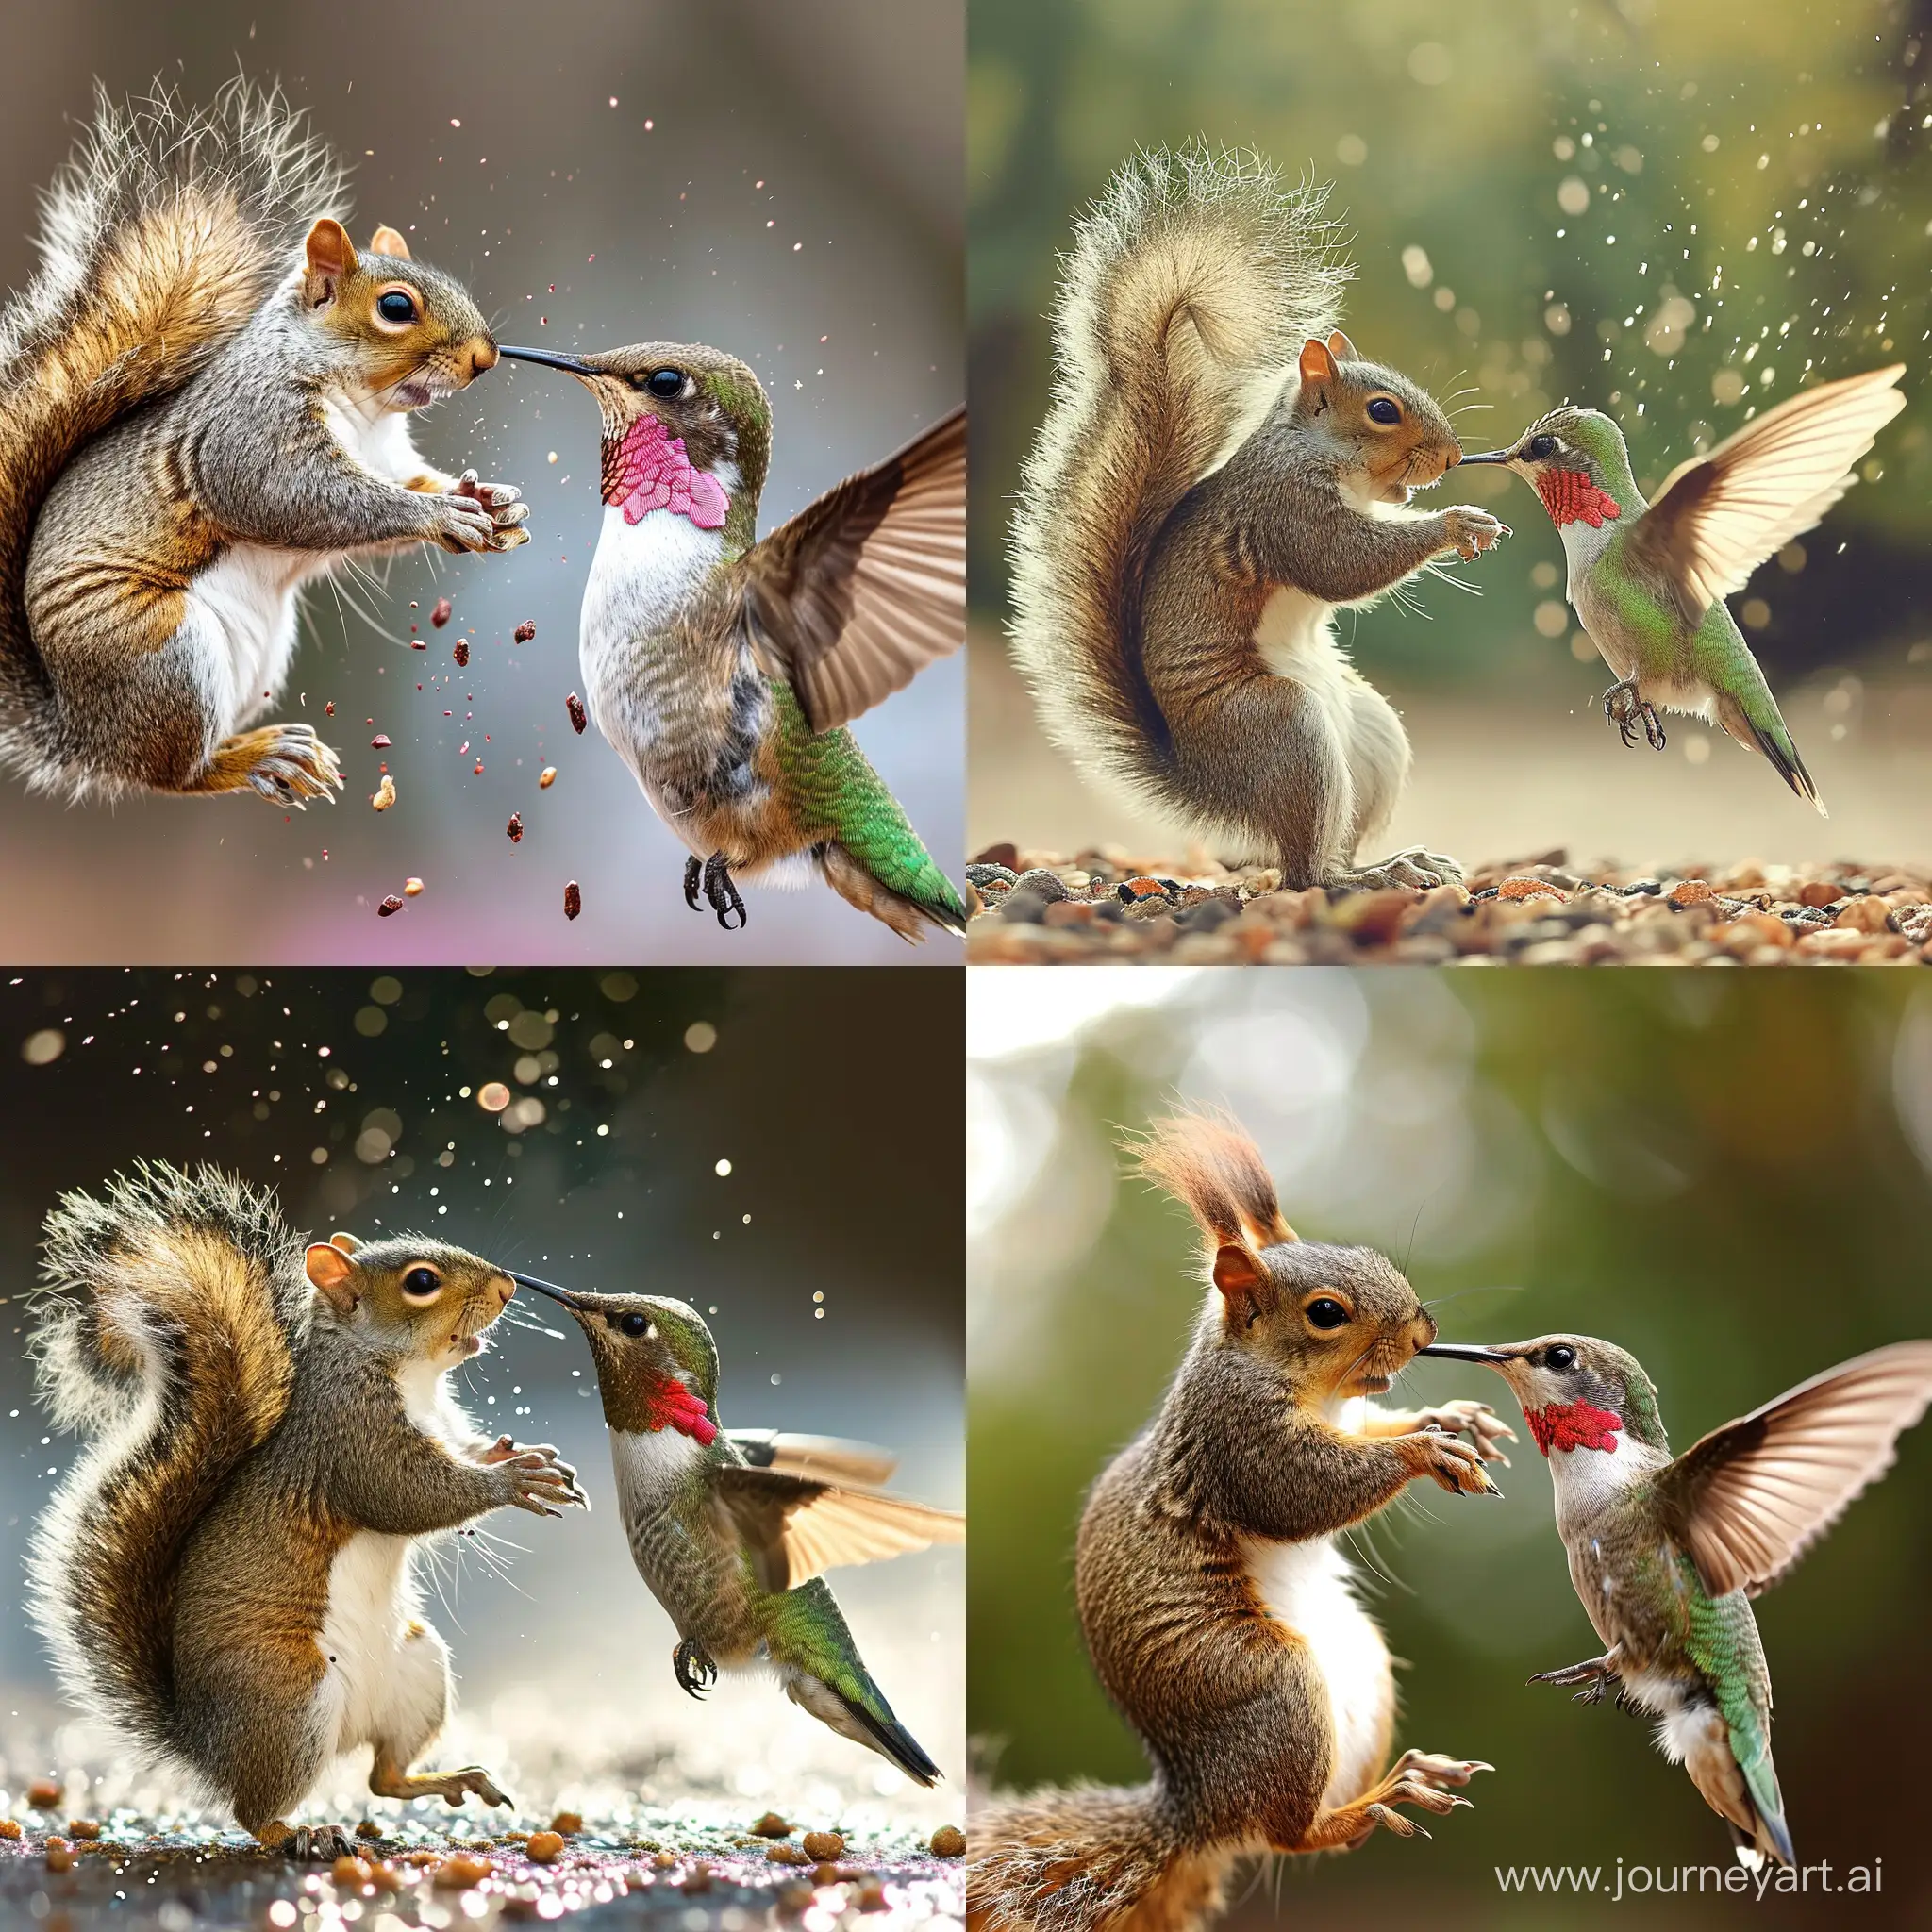 a squirrel fights against a hummingbird, battle, Epic battle, battle to the death